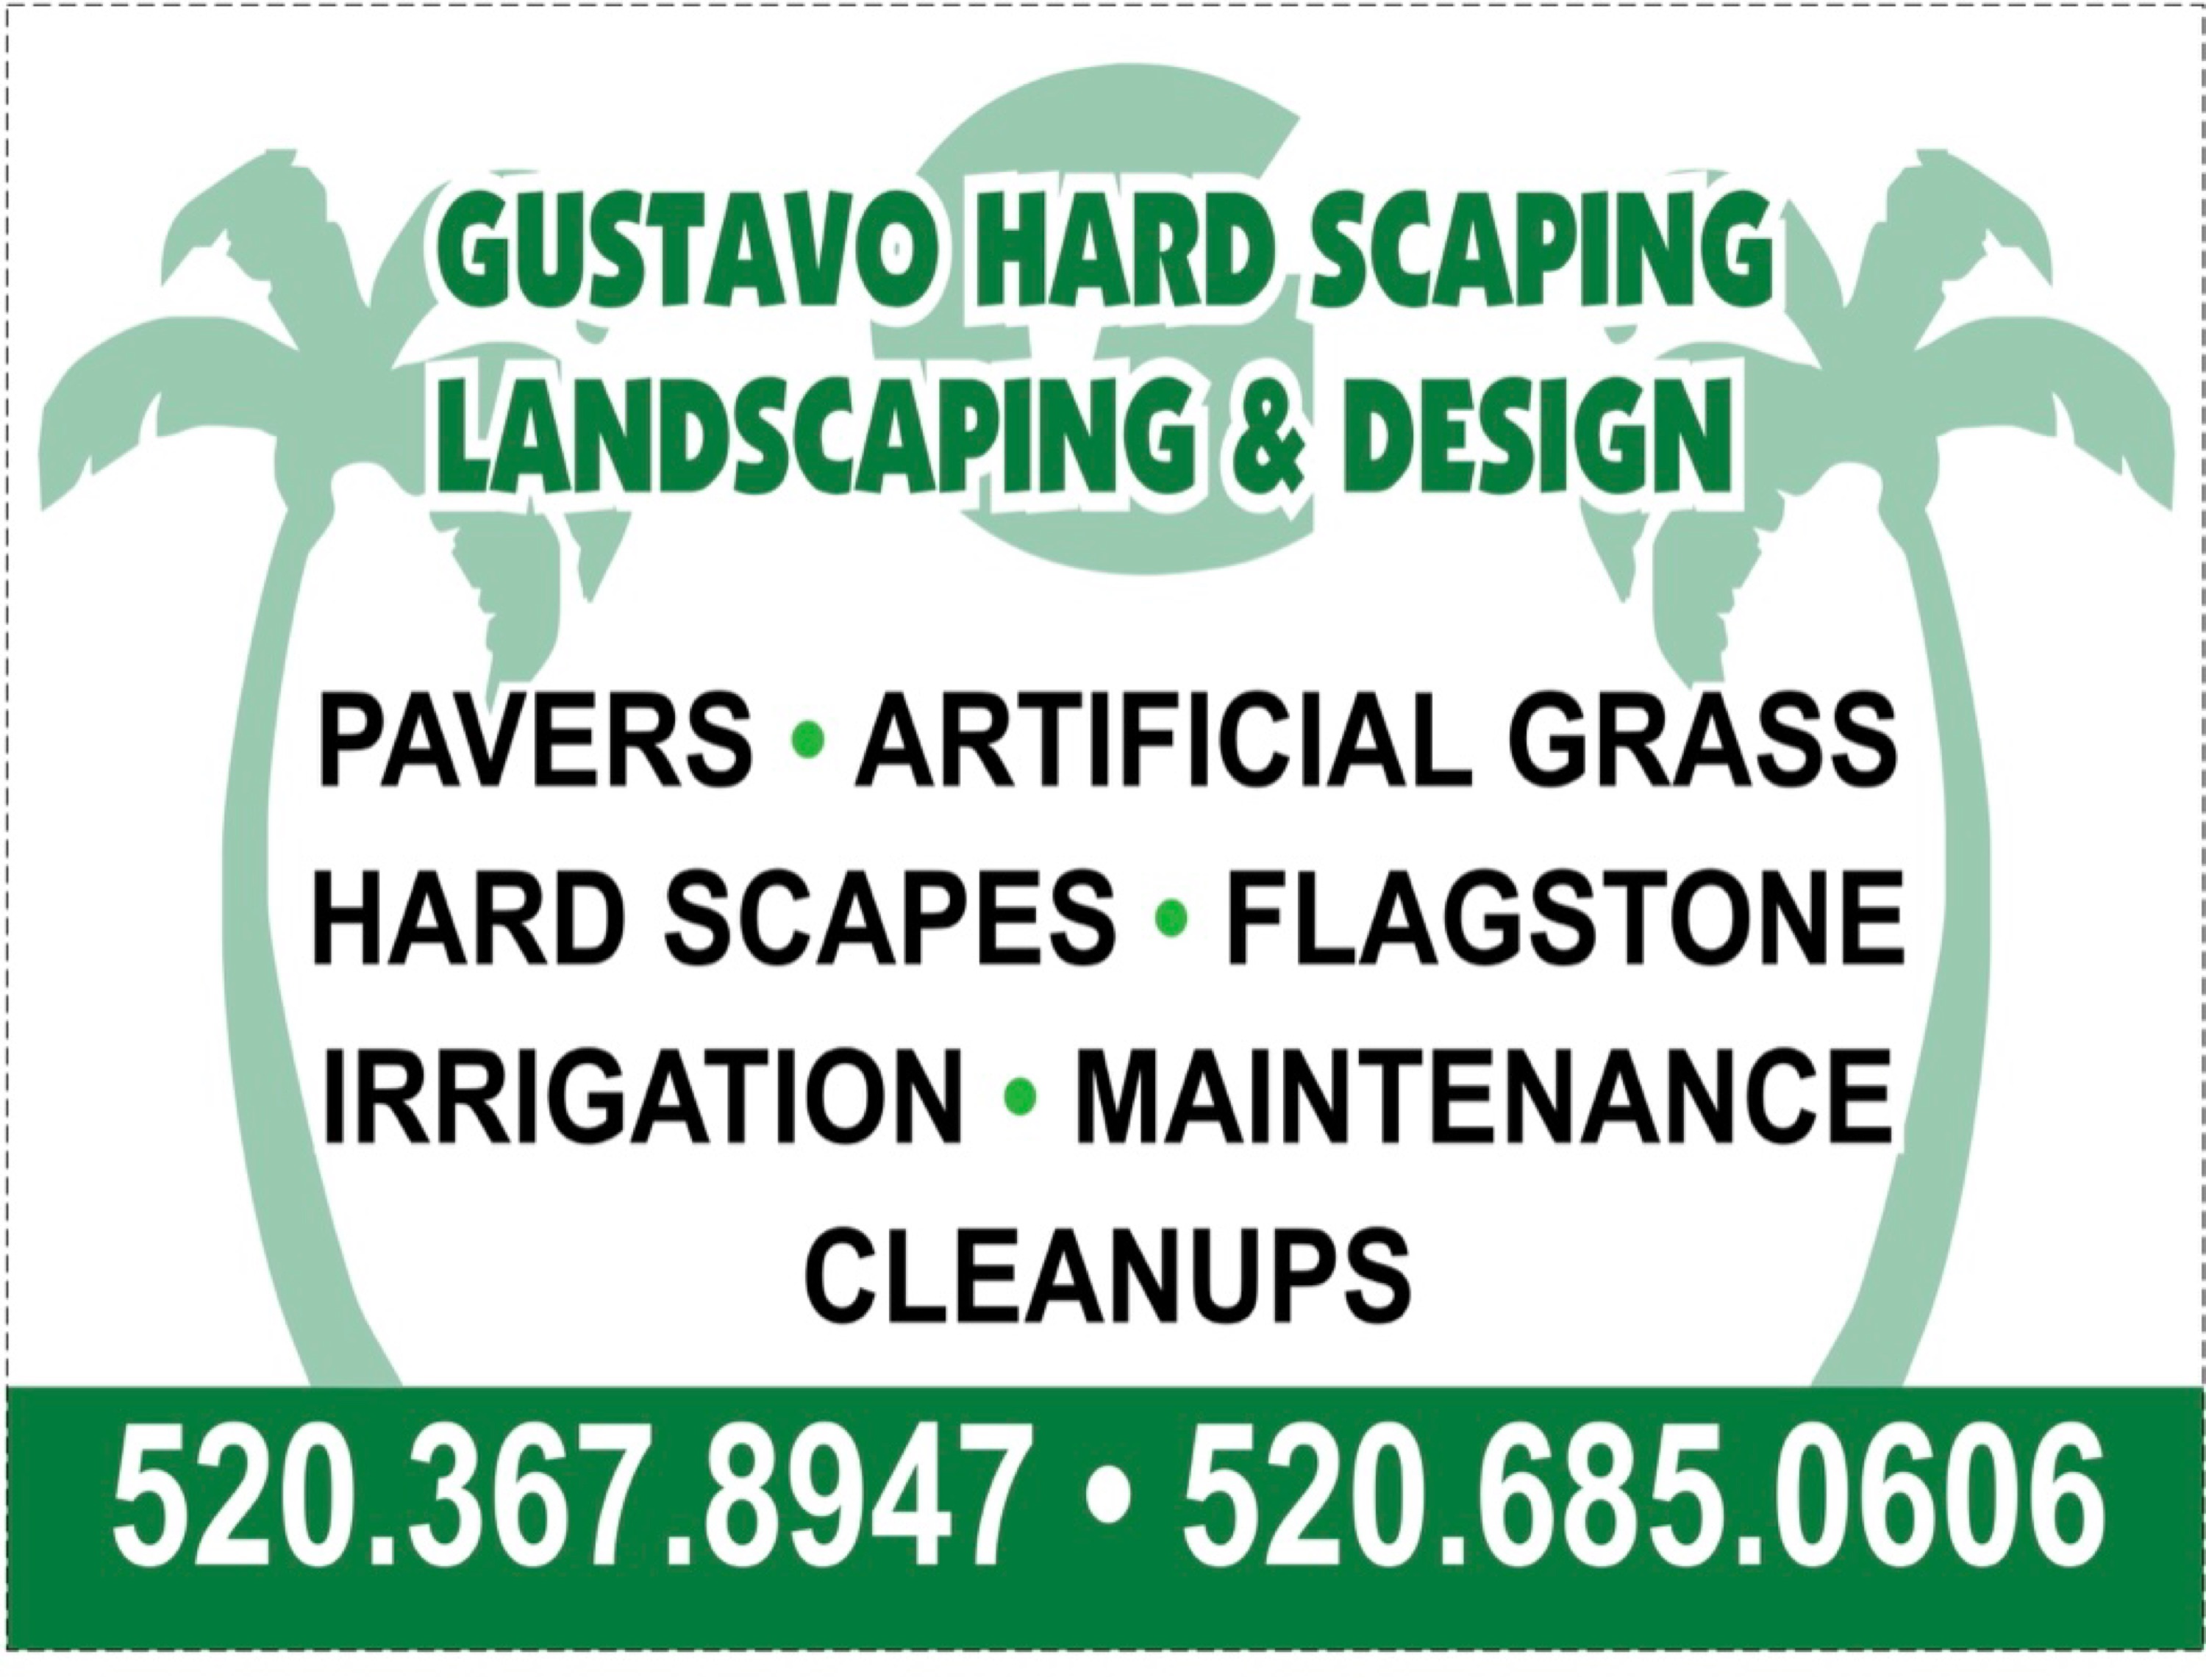 Gustavo Hardscaping and Landscaping Logo